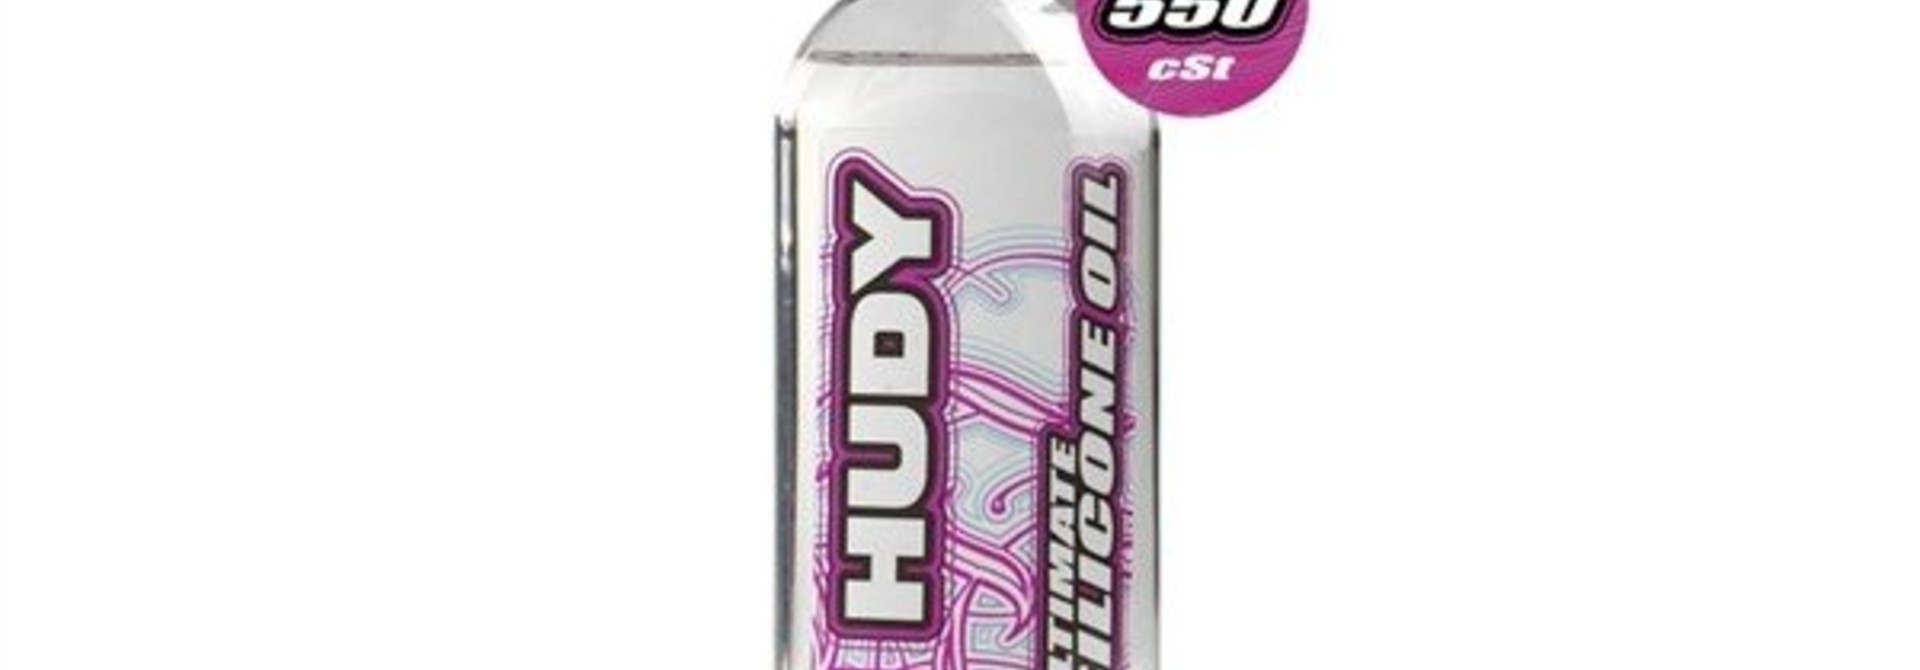 HUDY ULTIMATE SILICONE OIL 550 cSt - 100ML. H106356